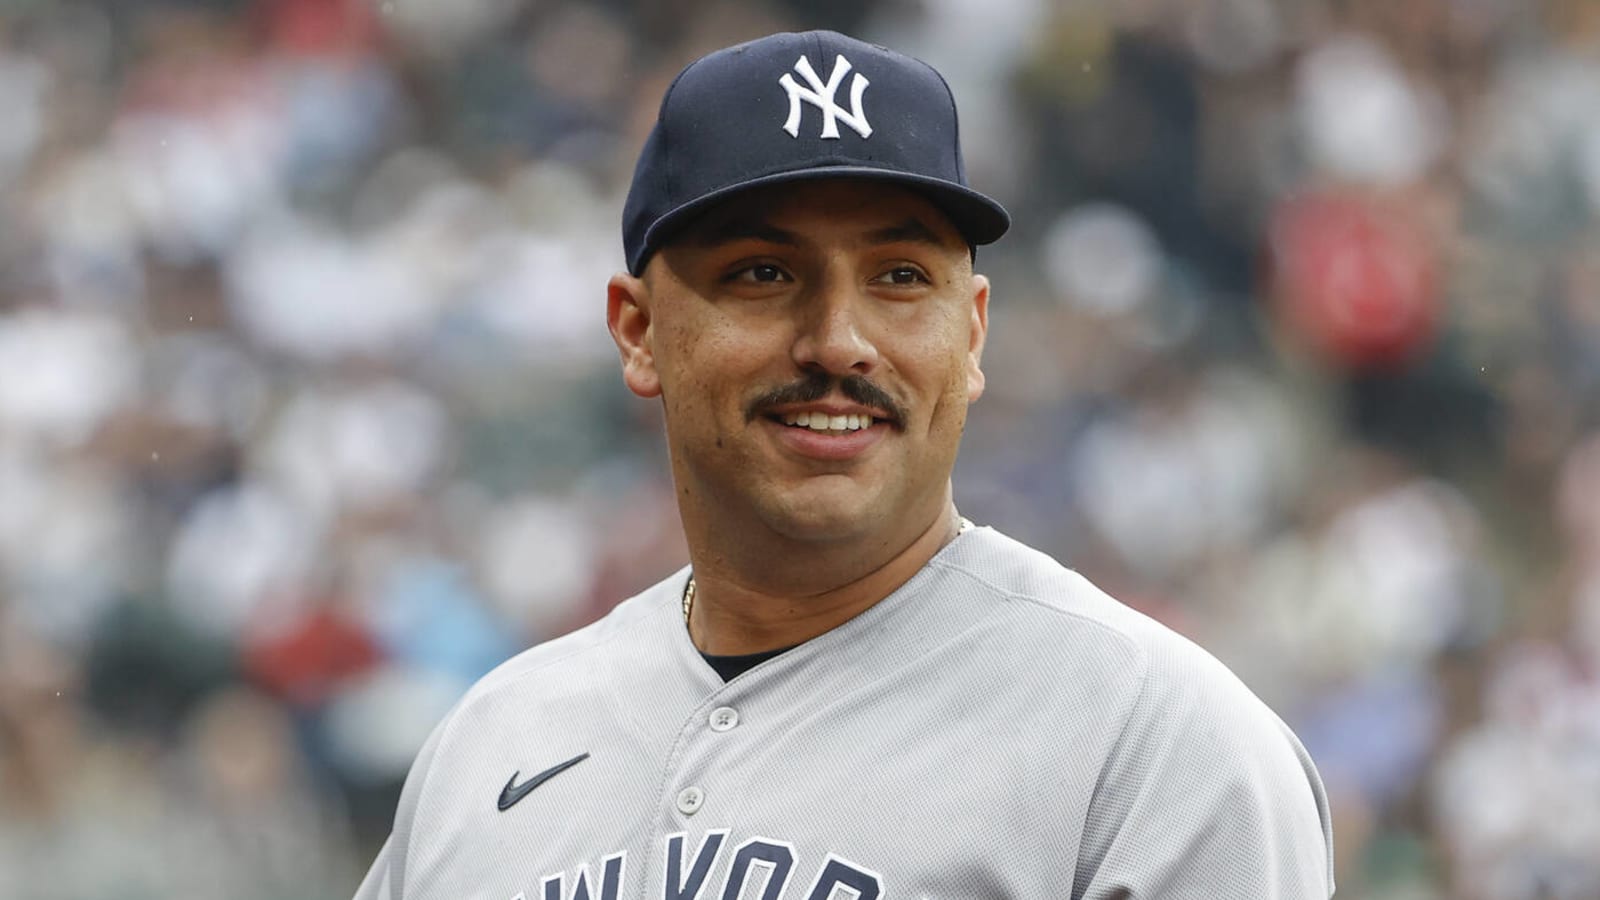 Yankees' Nestor Cortes deactivates Twitter account after old tweets get shared